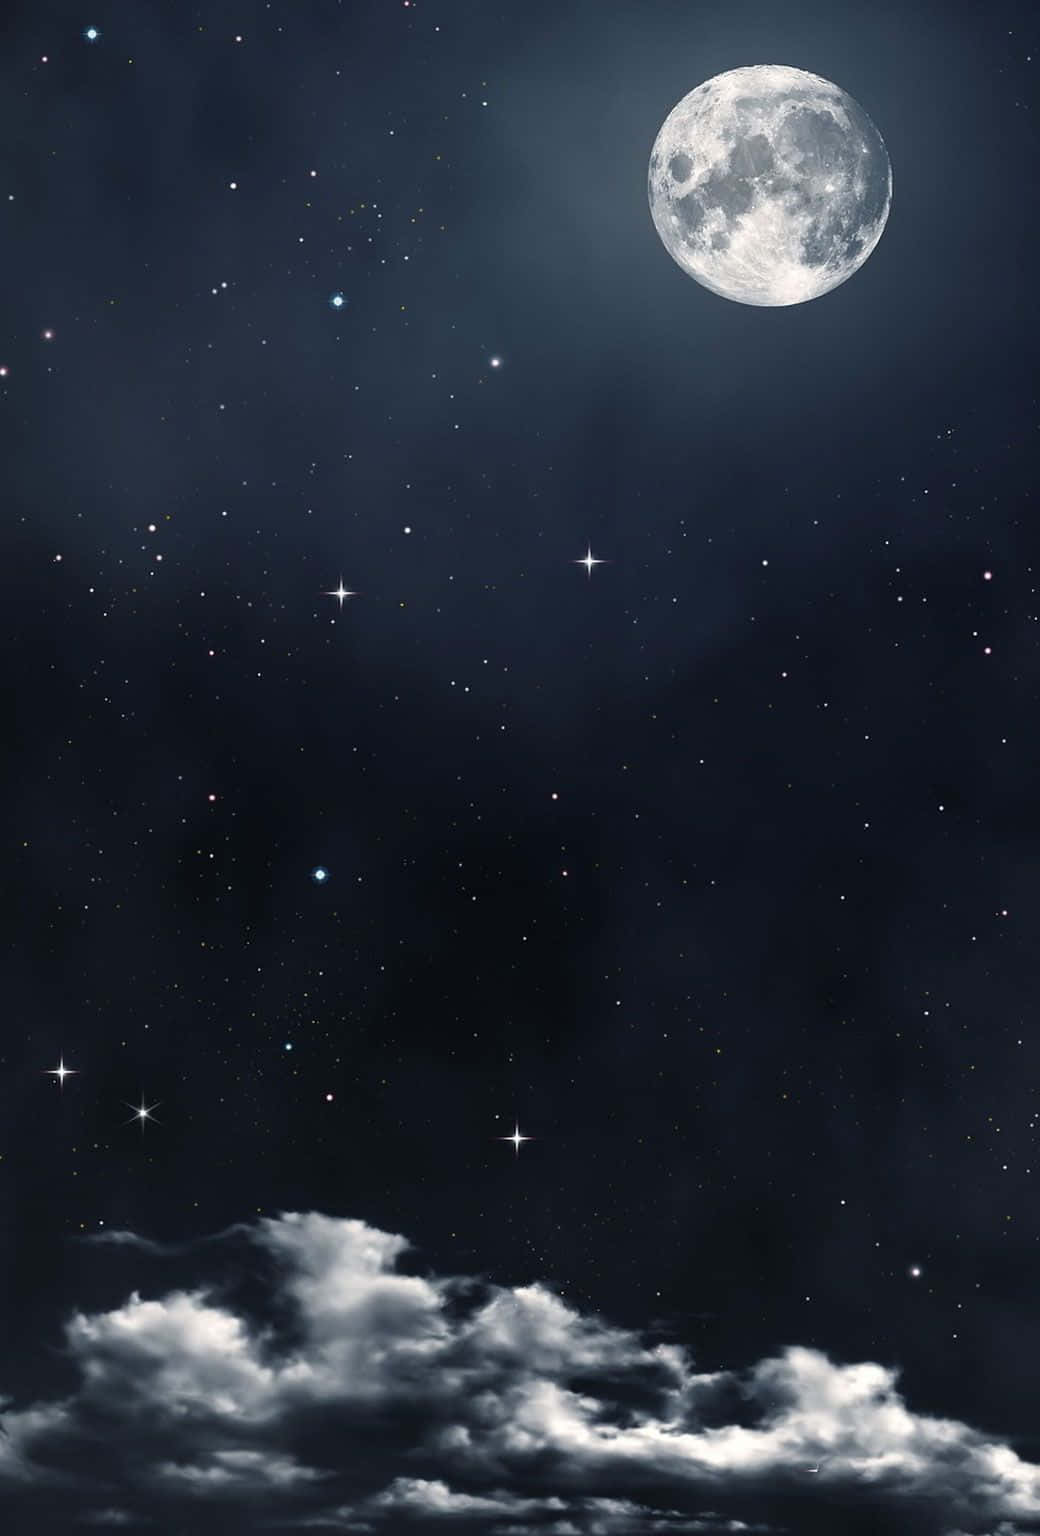 Moon And Stars Iphone With Clouds Below Wallpaper